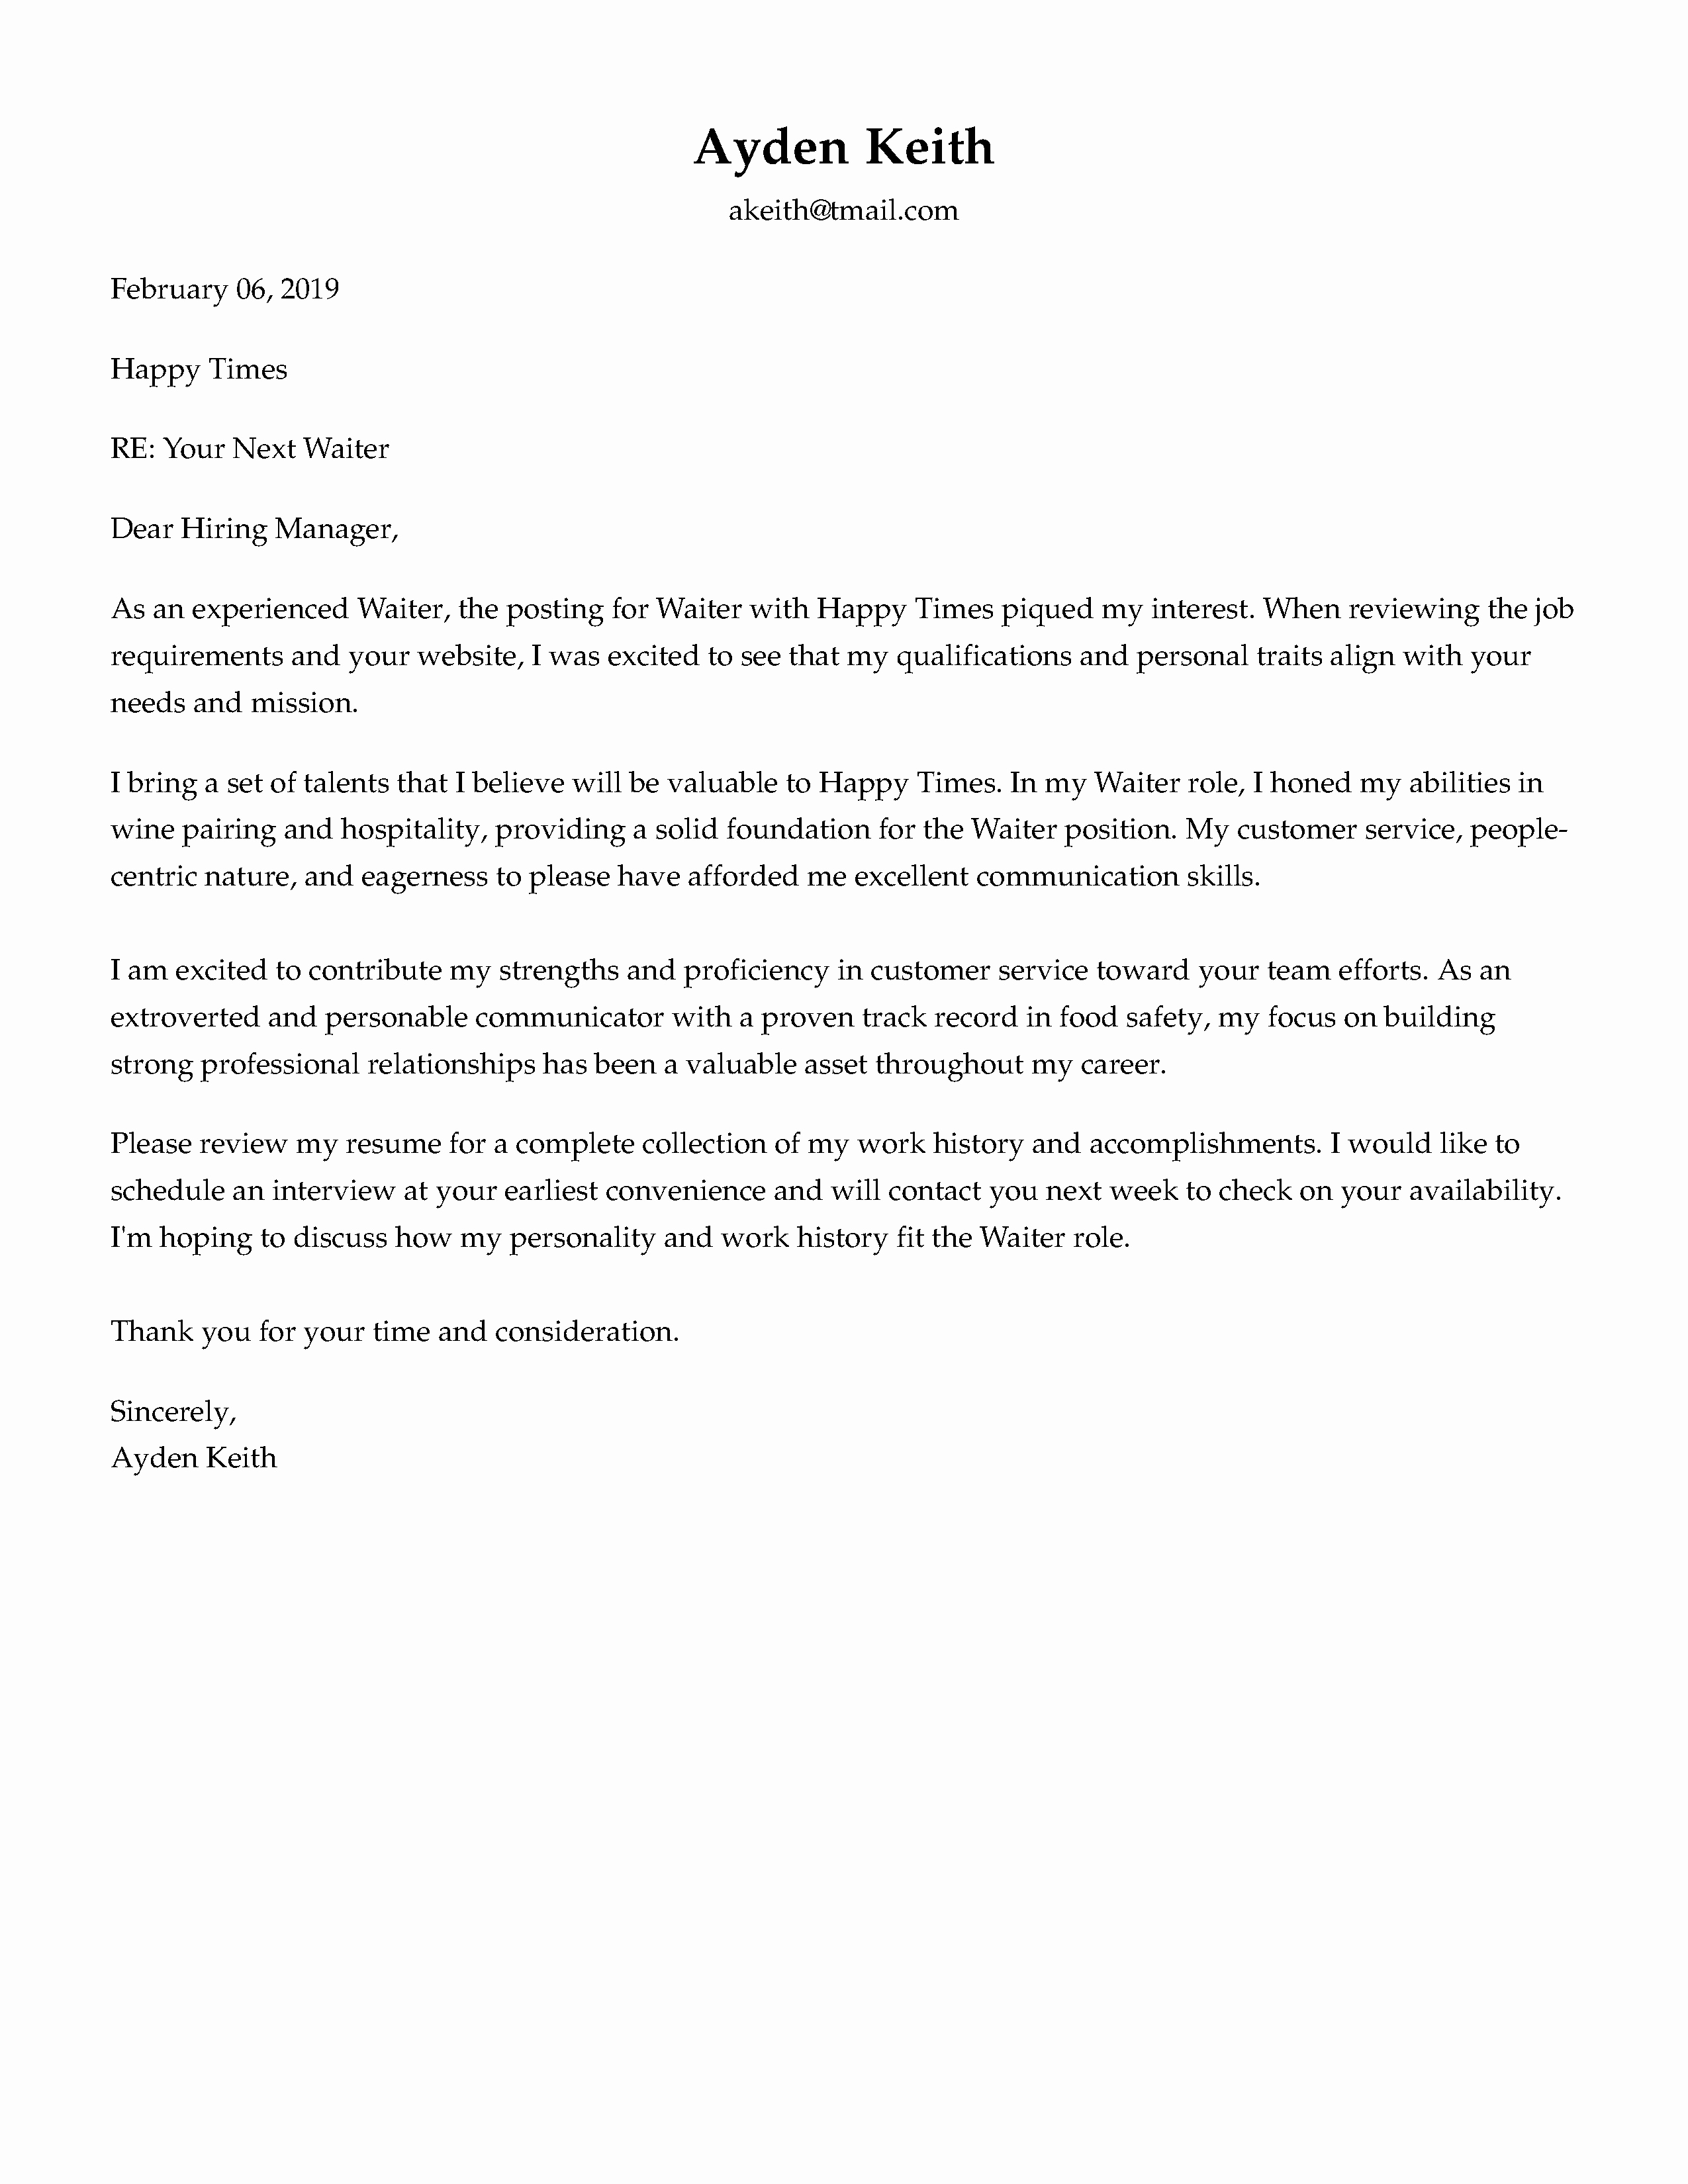 Emailed Cover Letter format Awesome Cover Letter formats &amp; formatting Advice that Will Win You